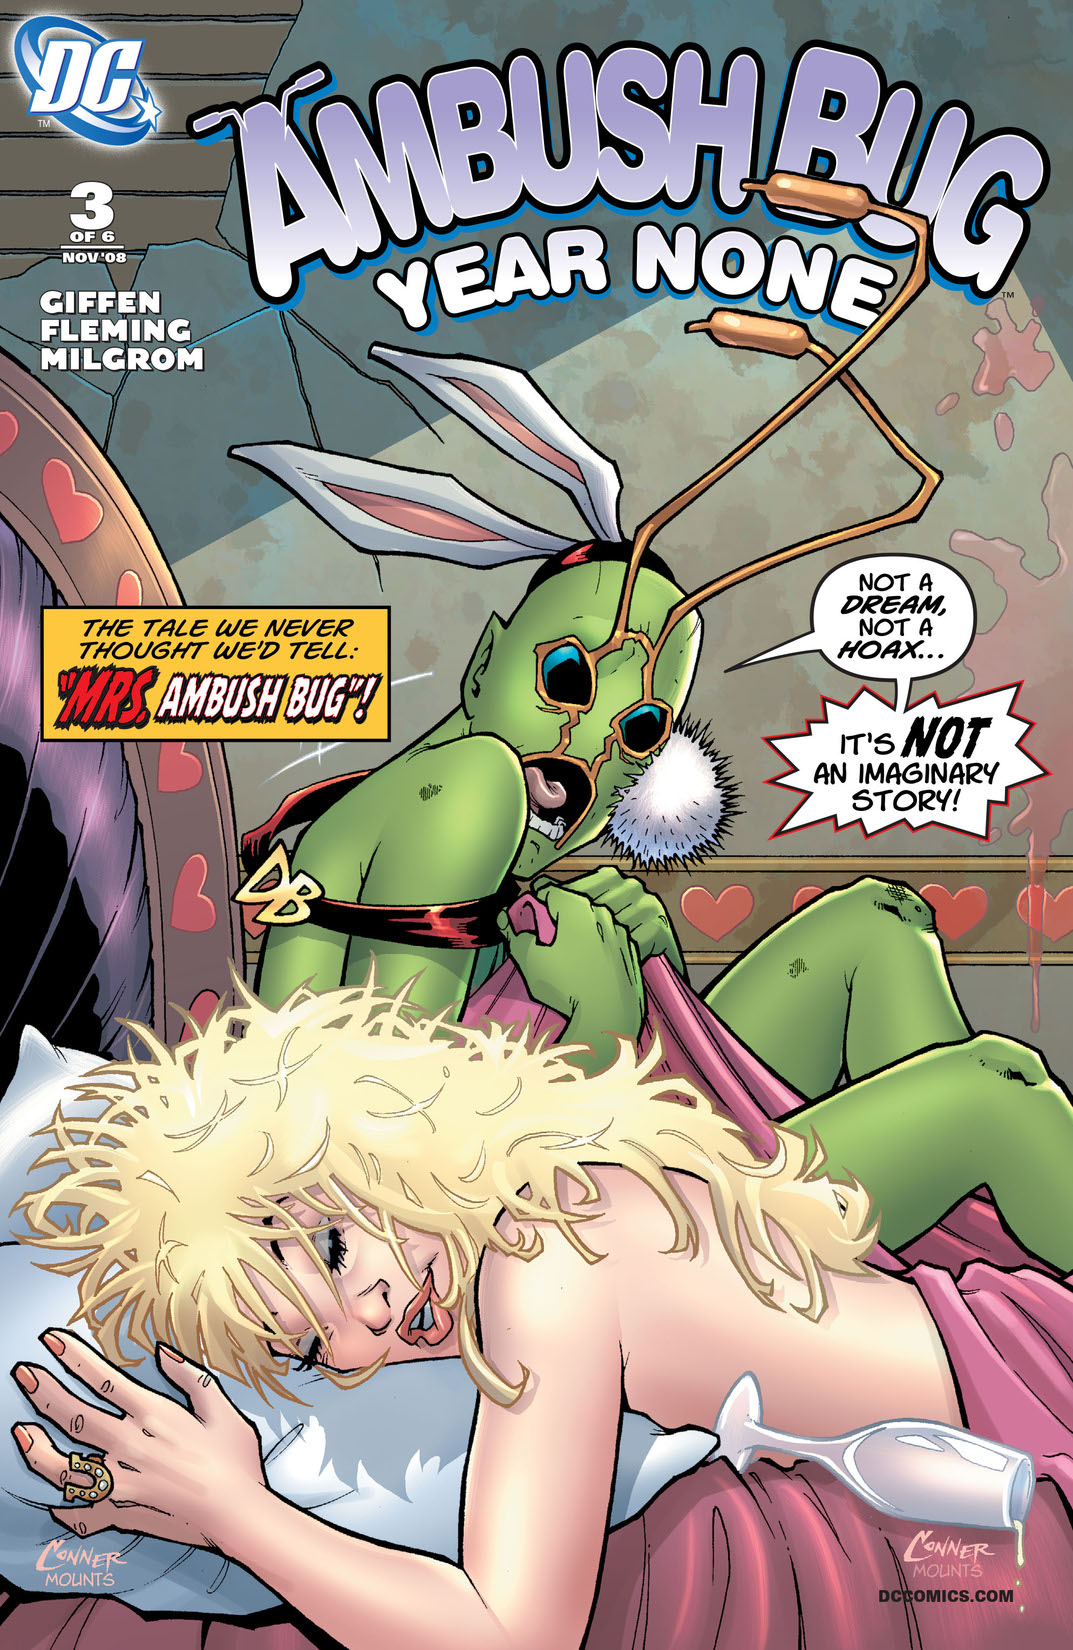 Ambush Bug: Year None #3 preview images